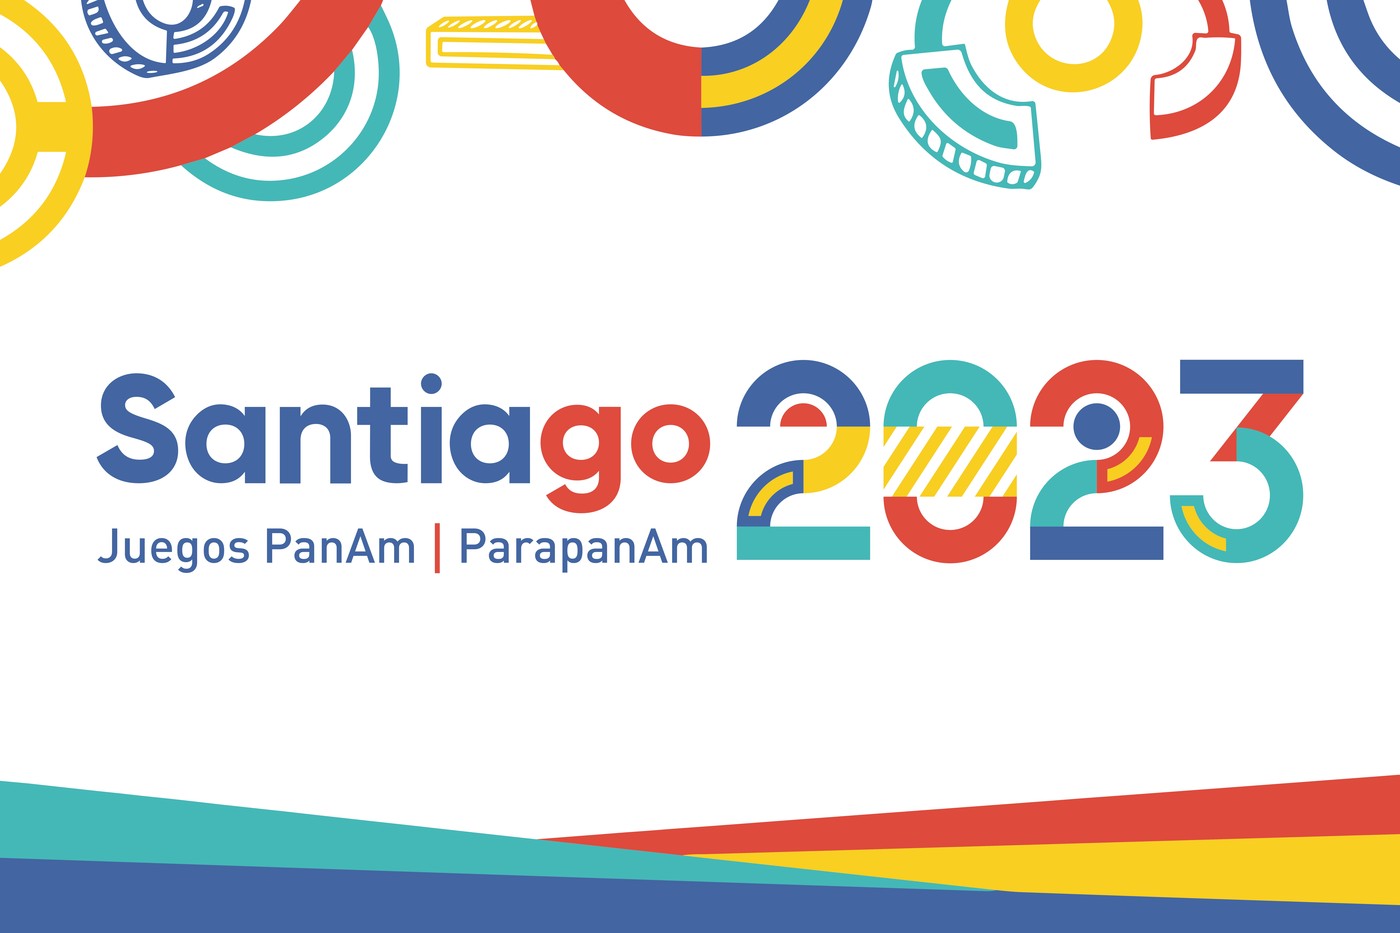 Pan American and Parapan American Games 2023. Official website of